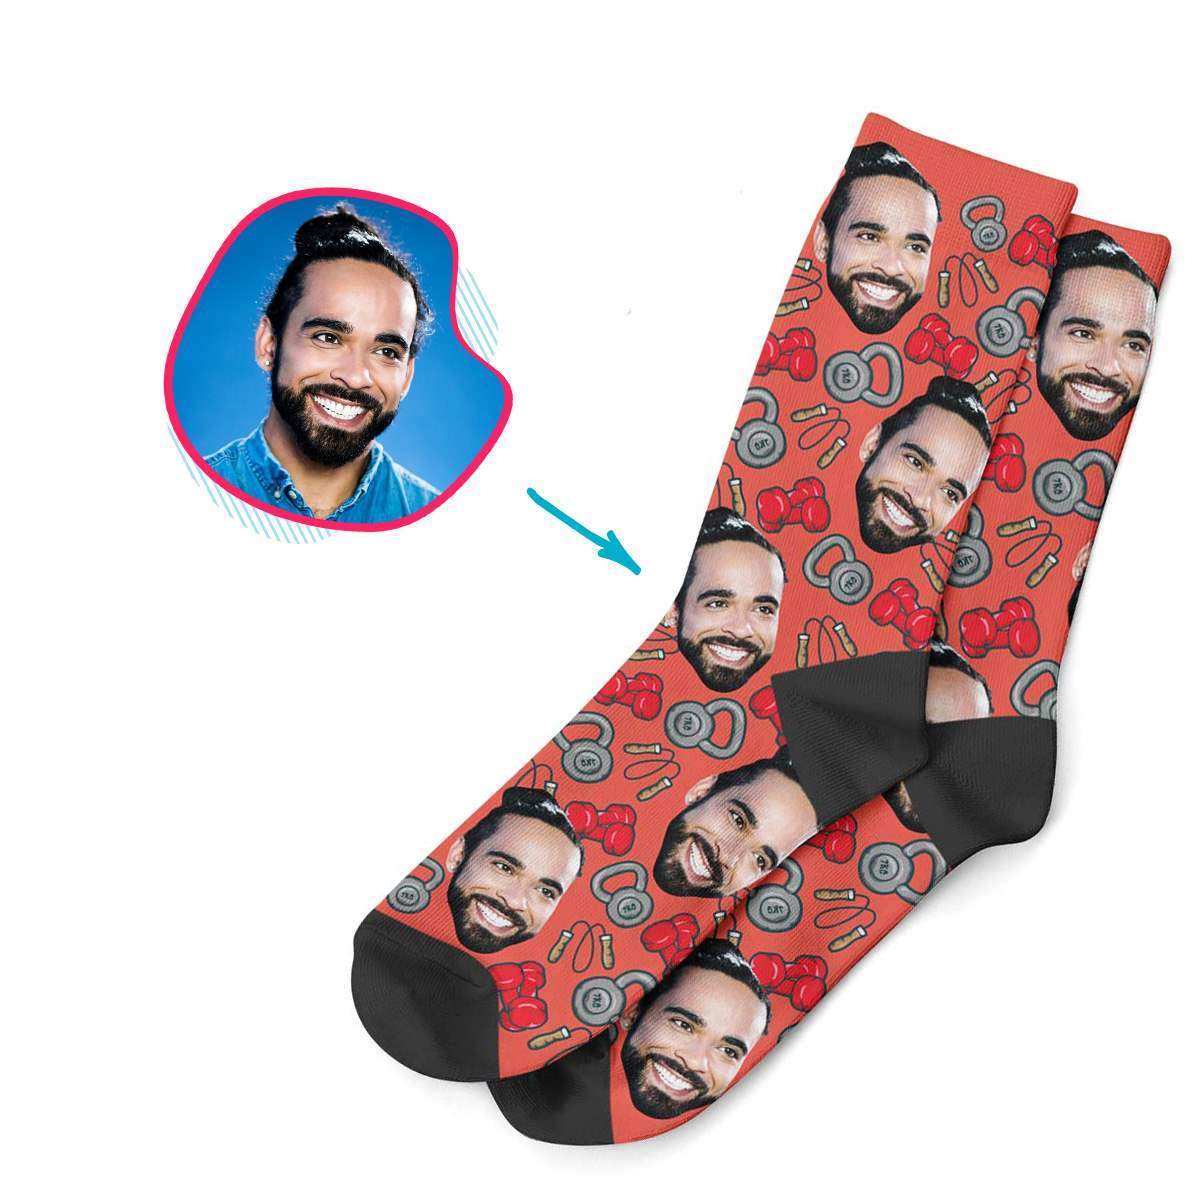 red Gym & Fitness socks personalized with photo of face printed on them